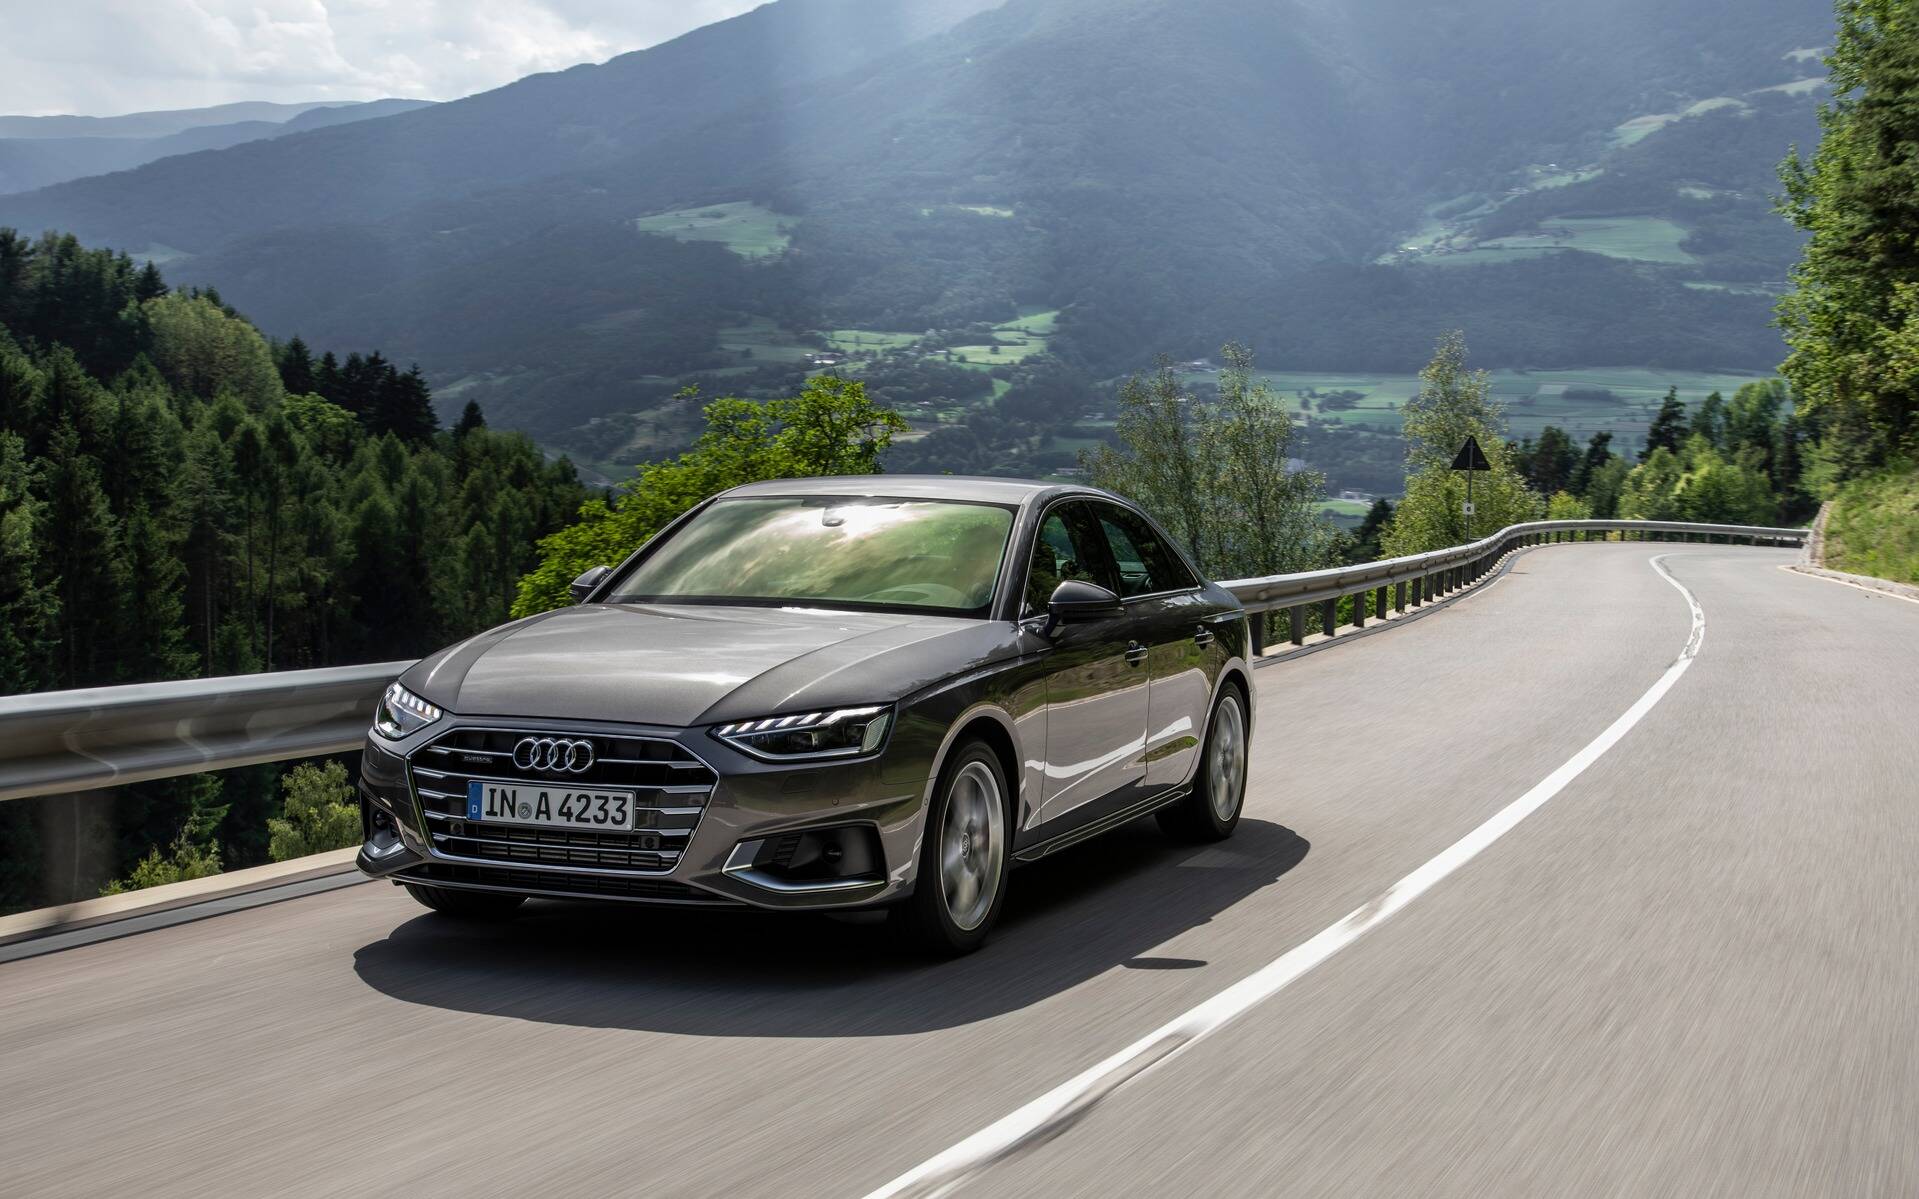 2023 Audi A4 - News, reviews, picture galleries and videos - The Car Guide